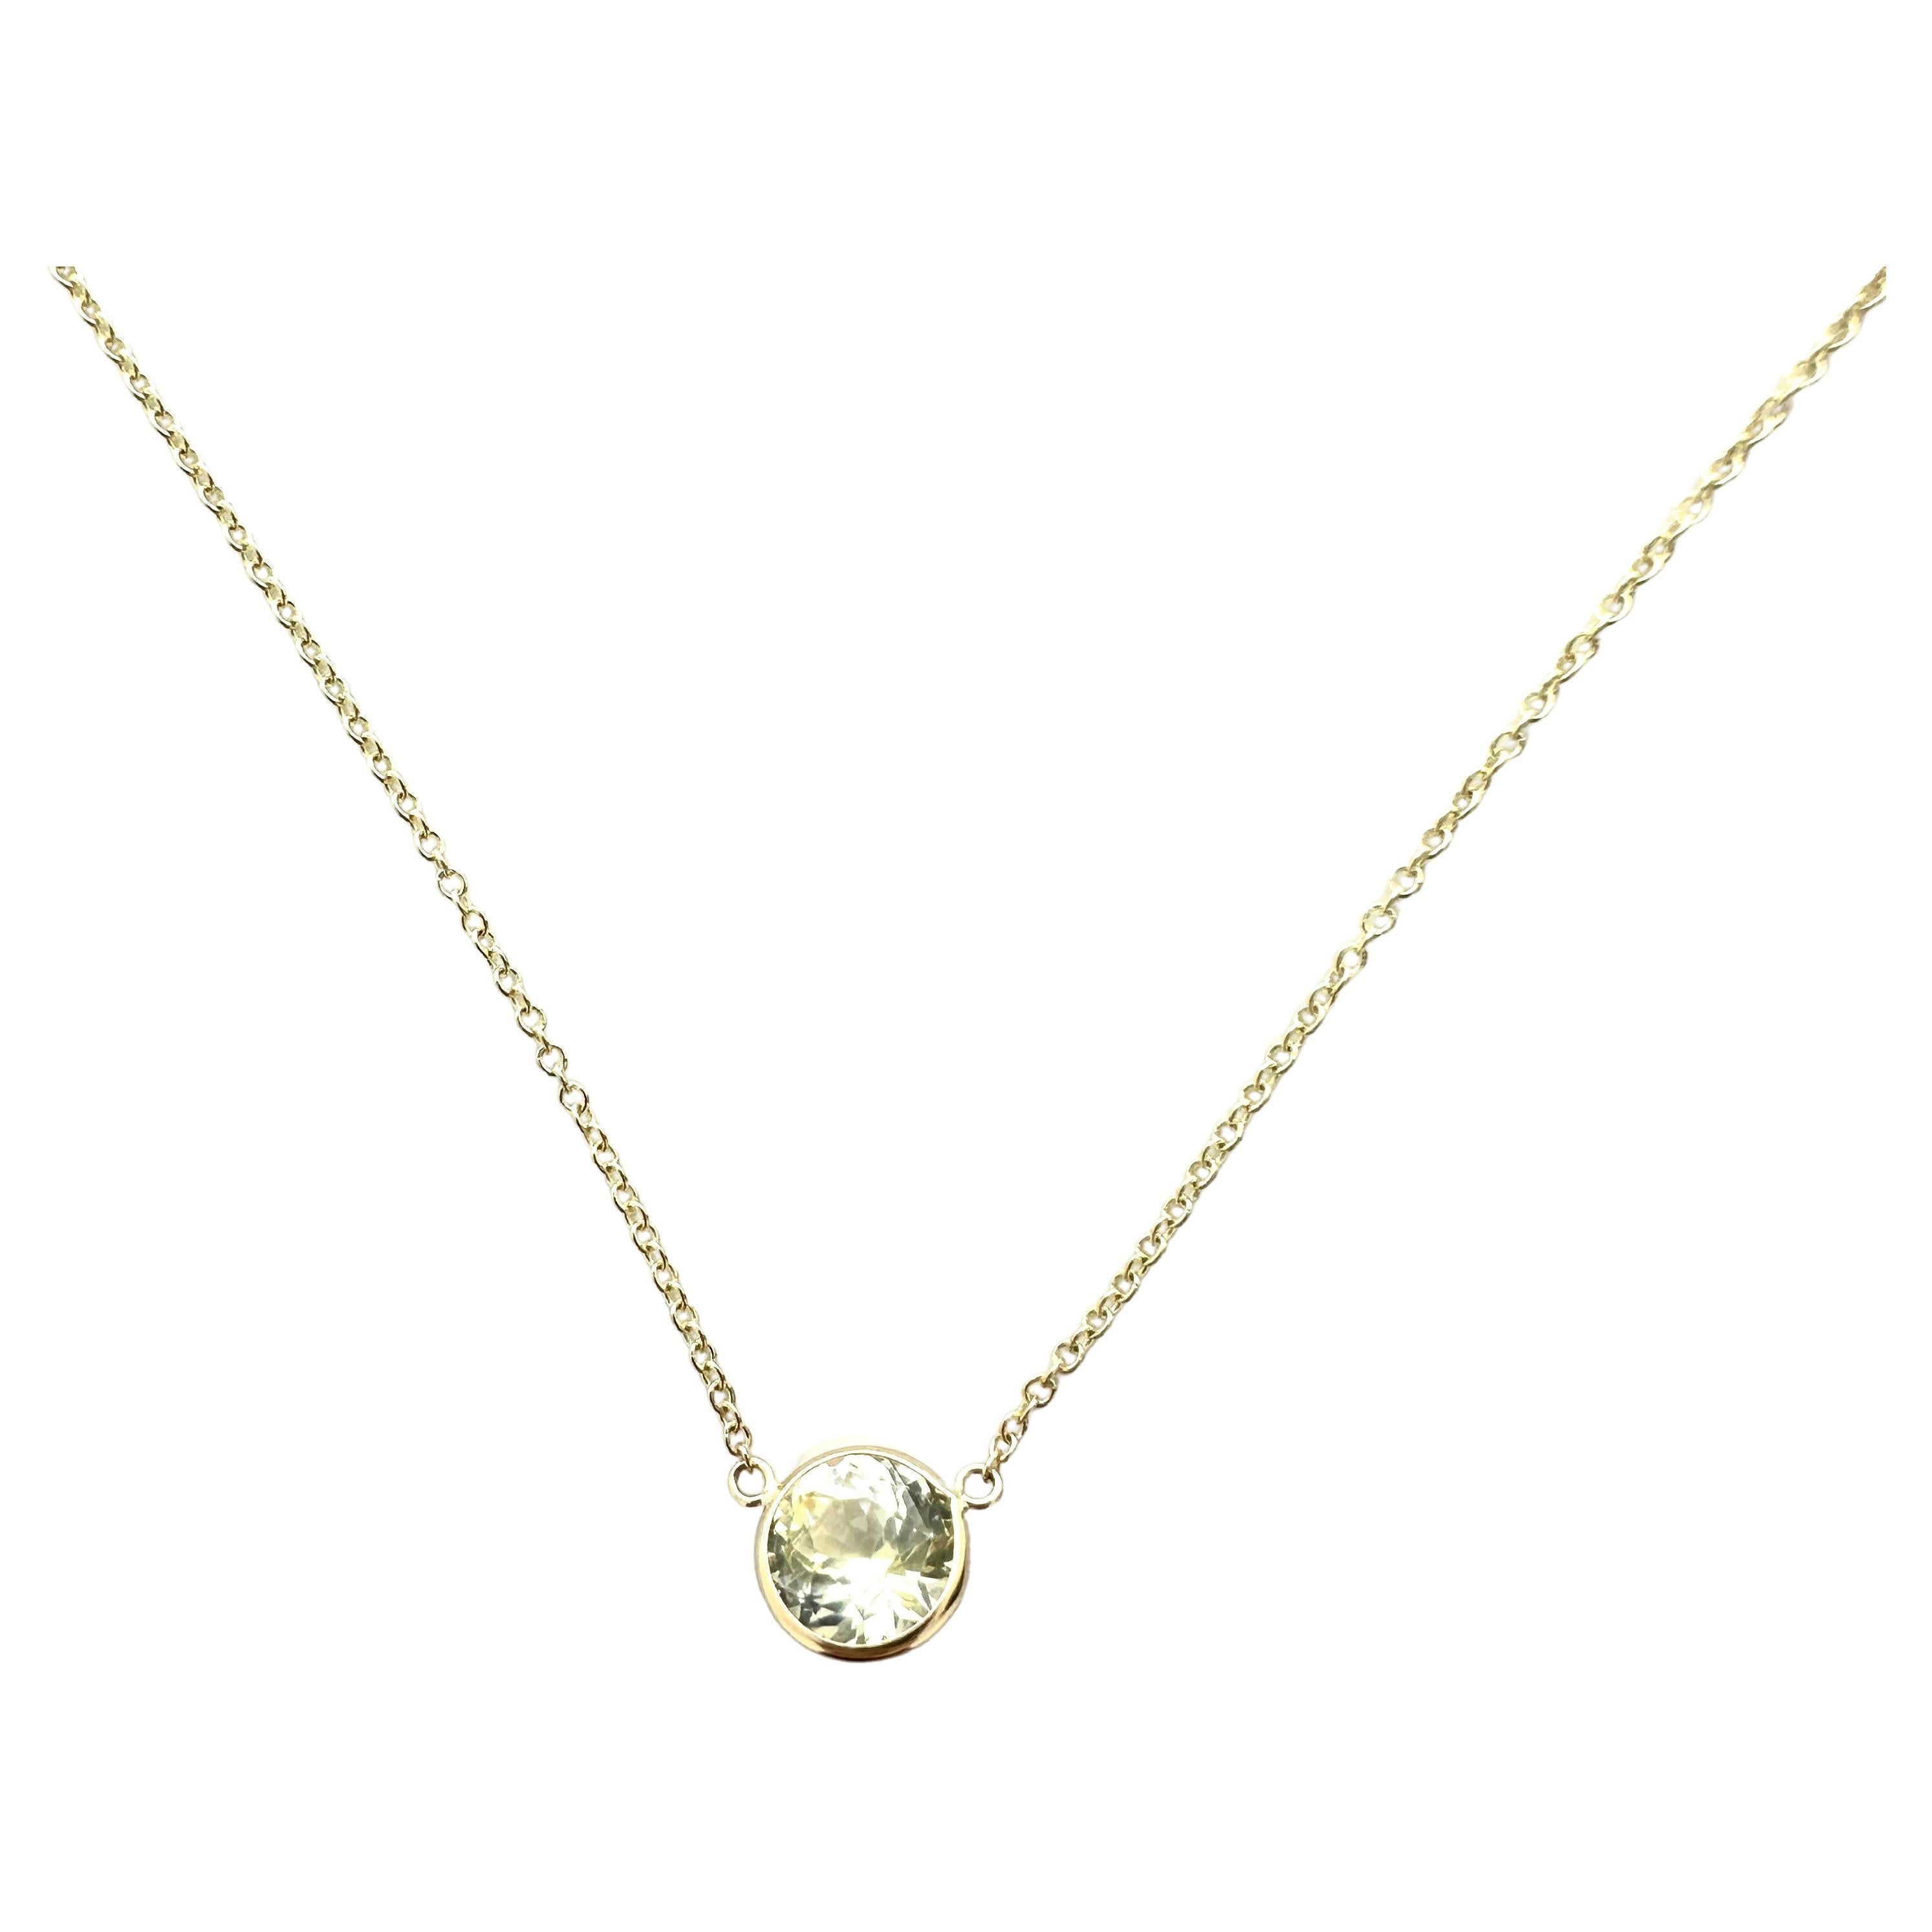 2.35 Carat Yellow Sapphire Round Certified &Fashion Necklaces In 14K Yellow Gold